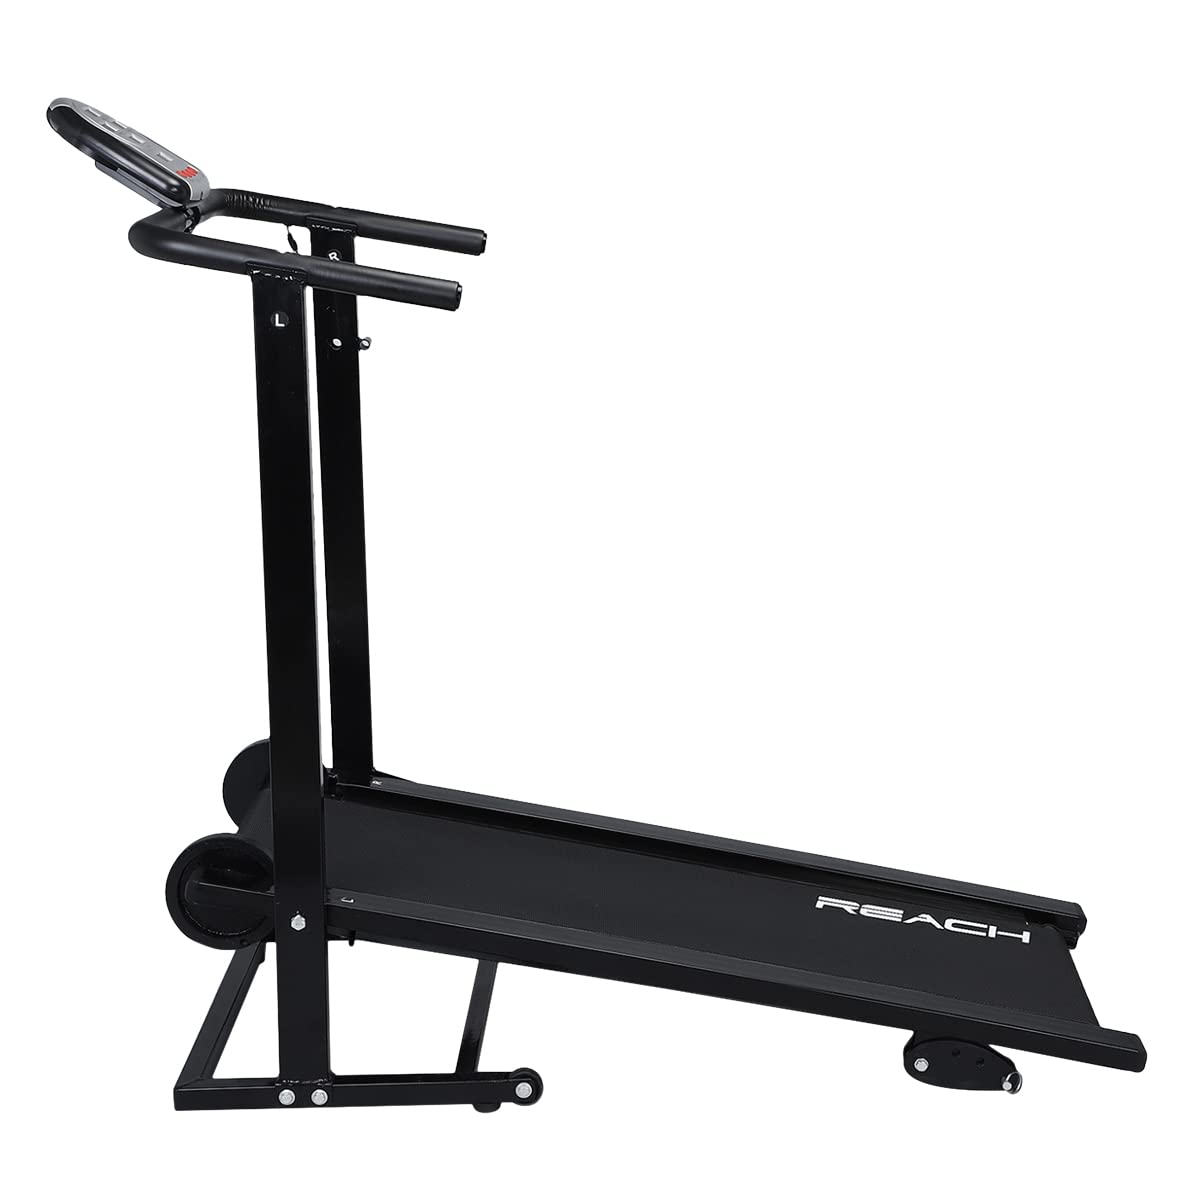 Reach T-90 Manual Treadmill | Fitness Equipment for Walking, Jogging, Exercise at Home Gym